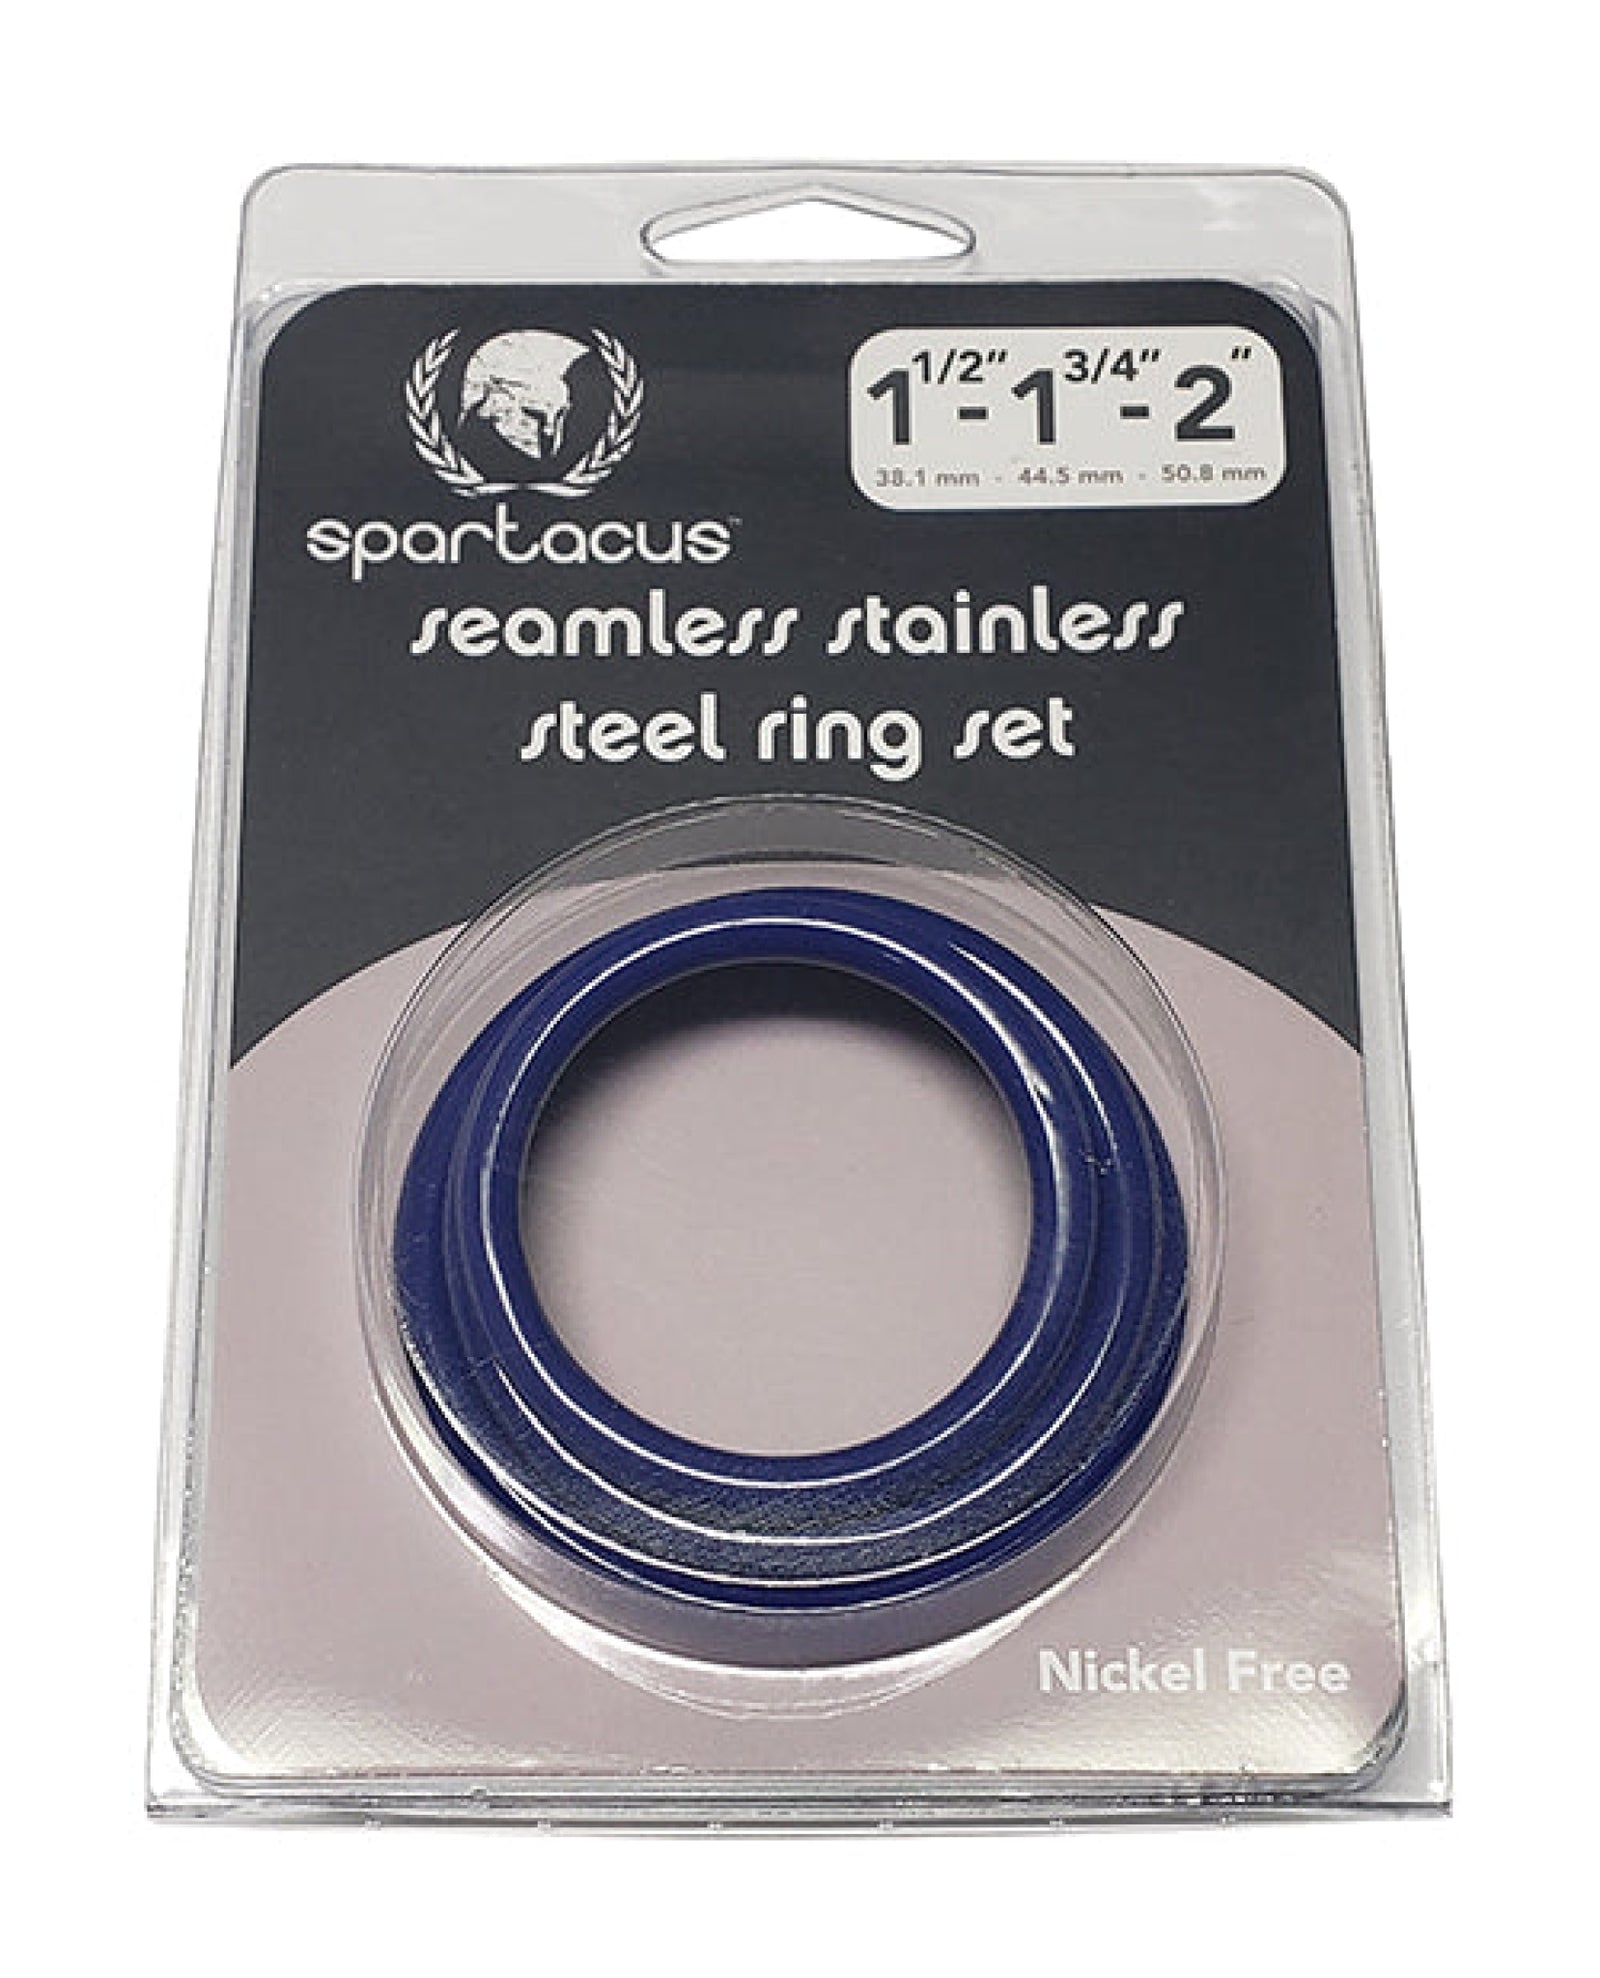 Spartacus Seamless Stainless Steel C-ring - Blue Pack Of 3 Spartacus